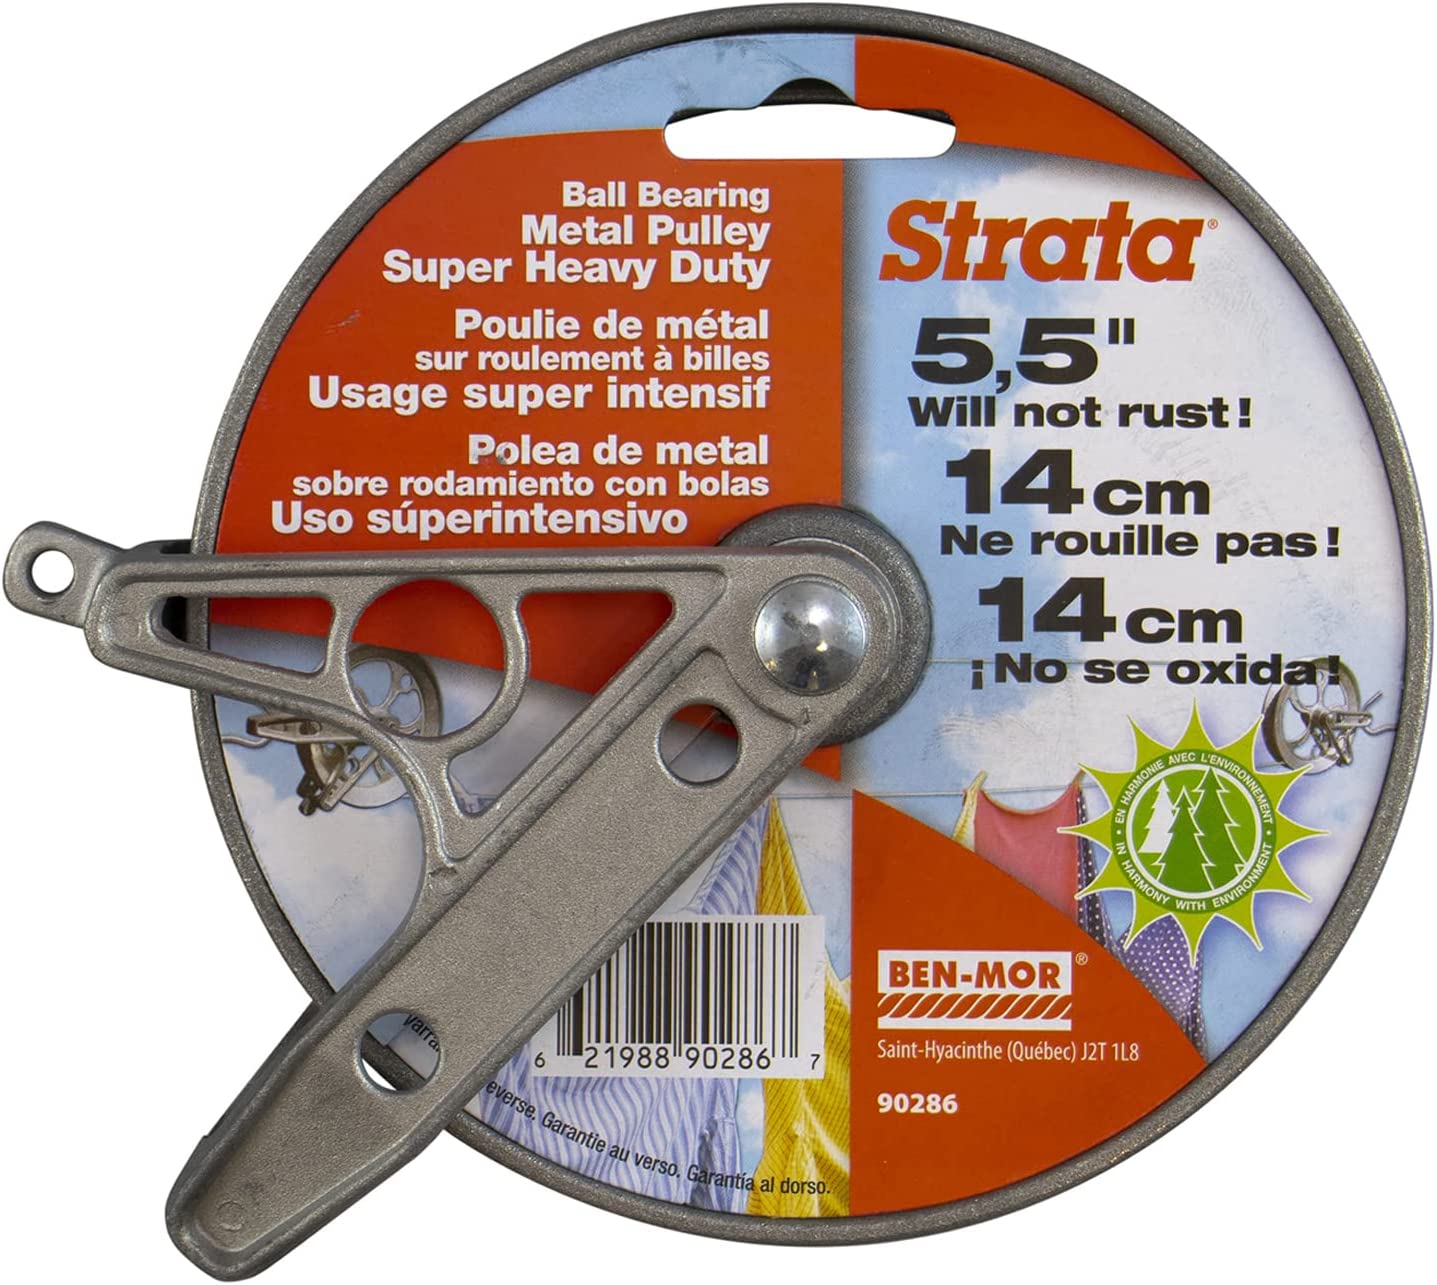 Strata Ball Bearing Style Clothesline Pulley – 5.5” Heavy Duty Metal, Rustproof Silver for Outdoor Laundry Drying, Line Pulley for Clothes, Coats, Blankets, and More